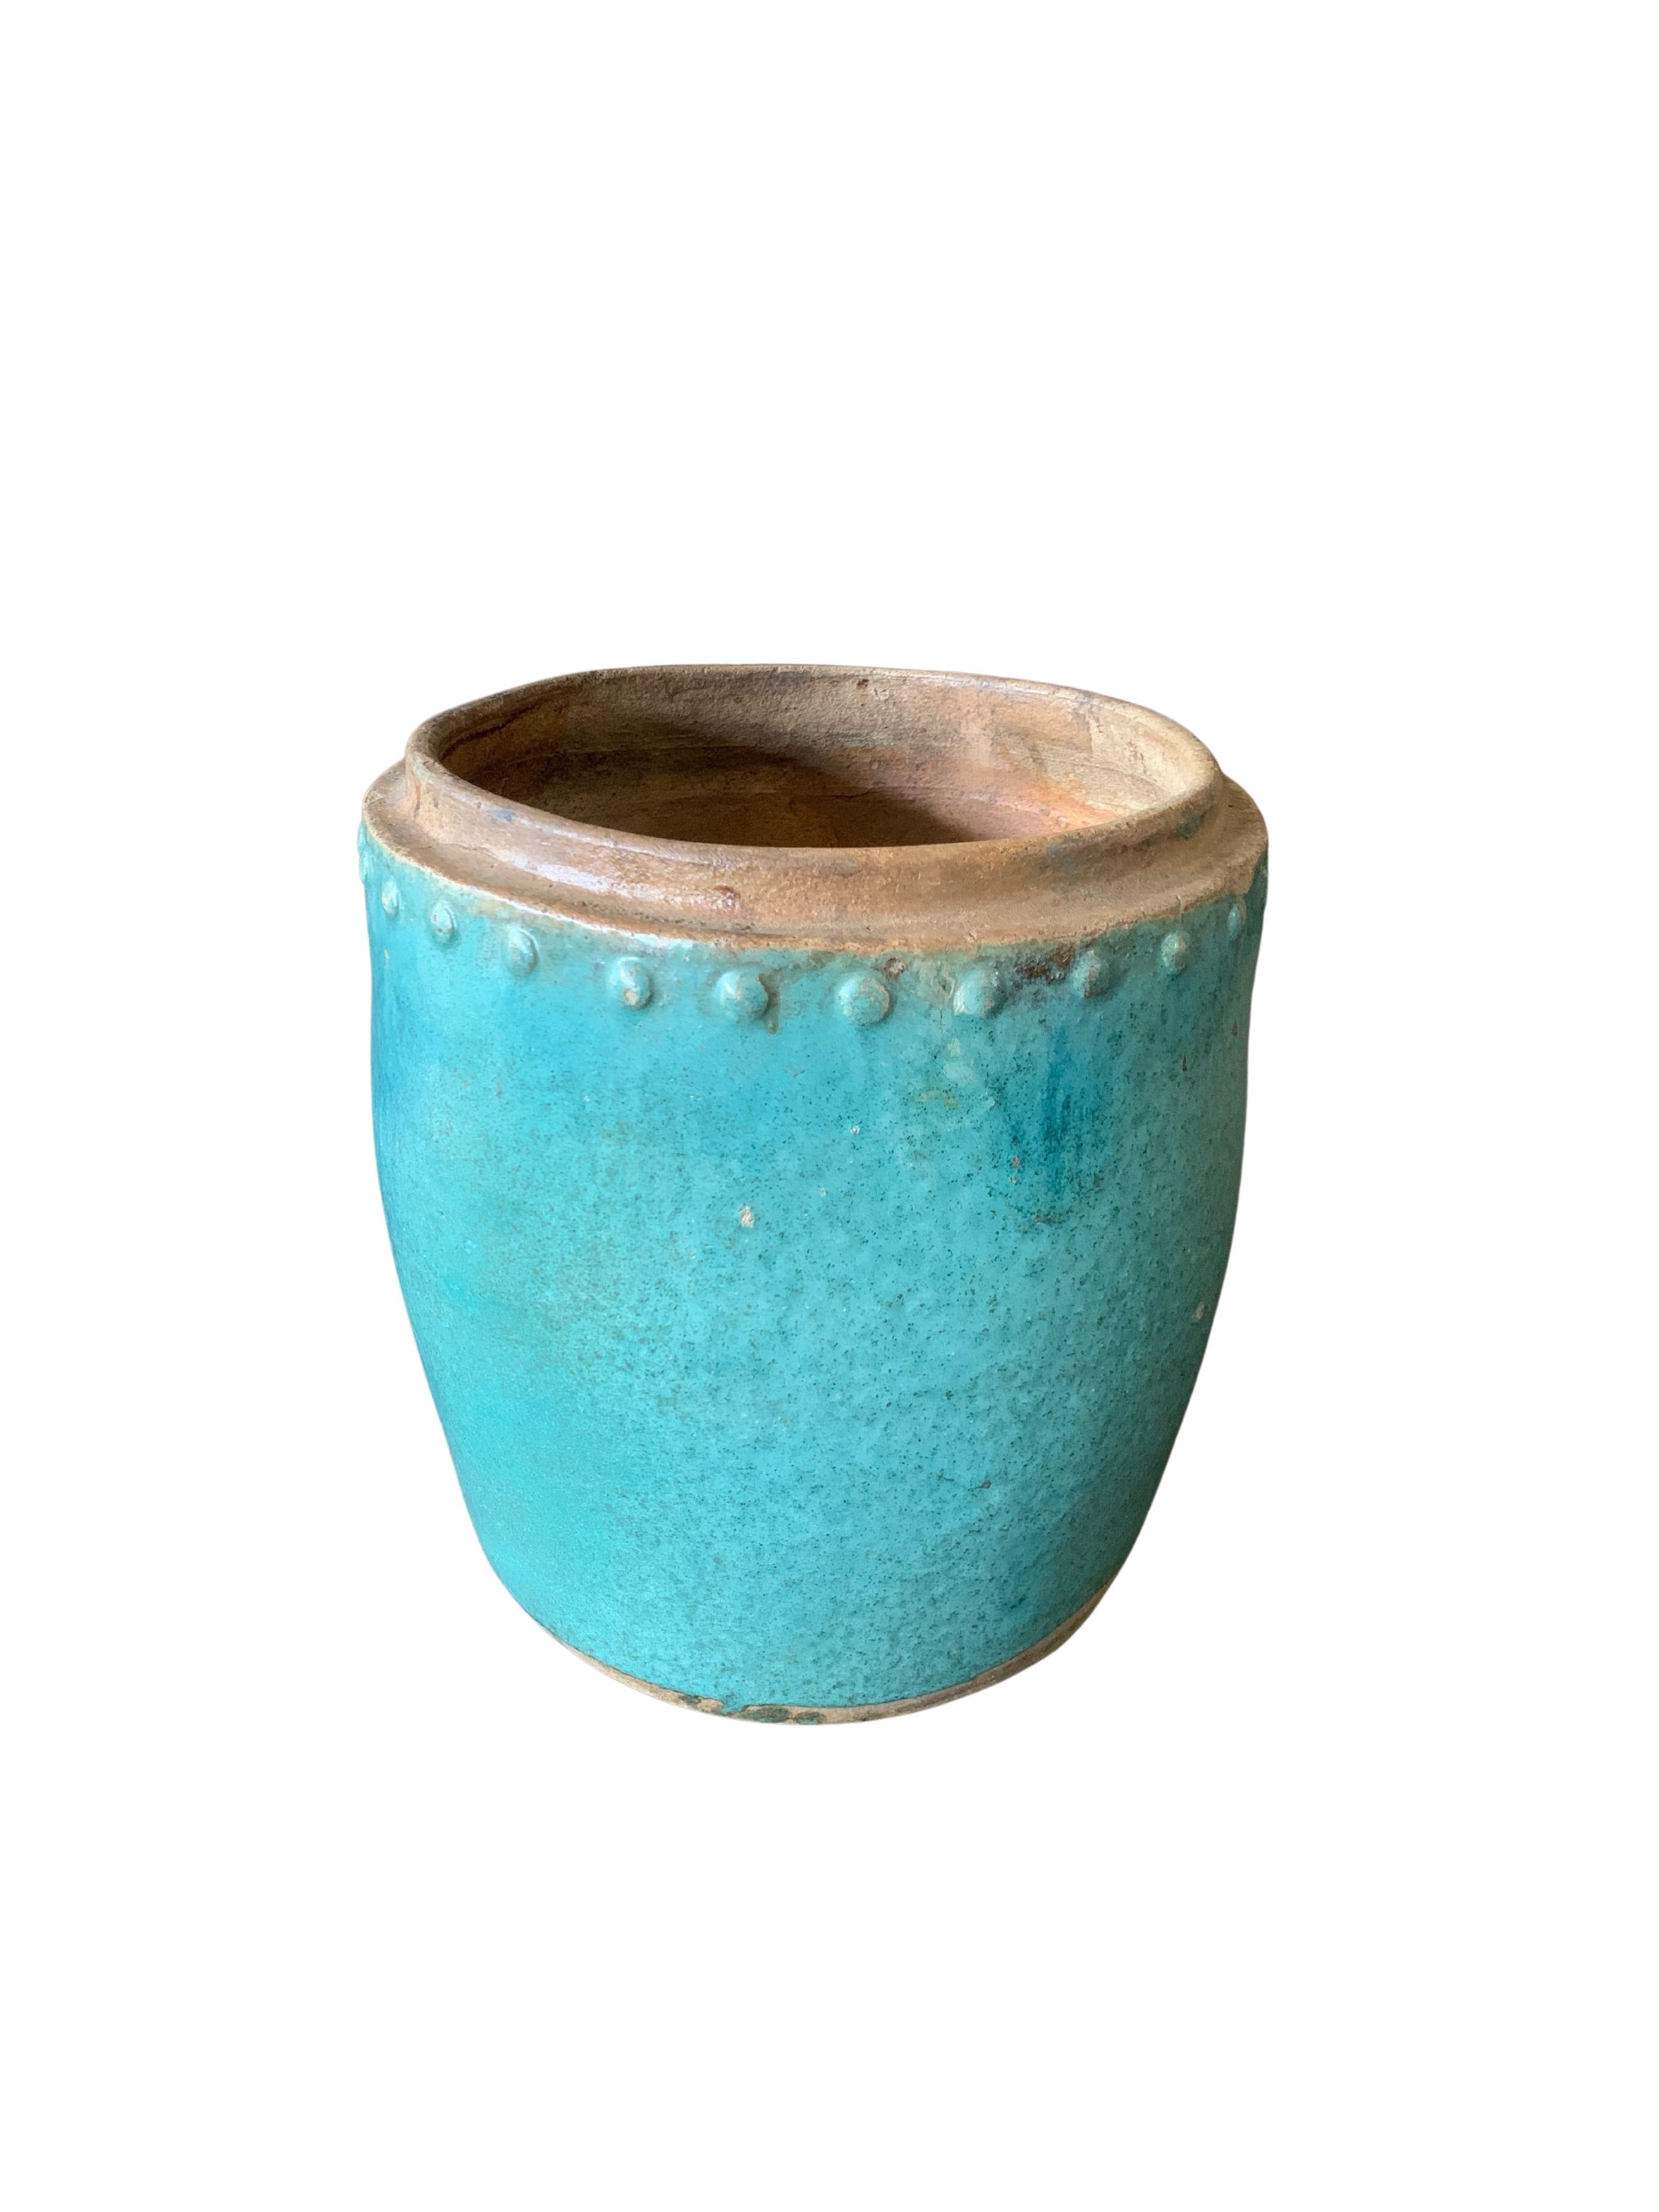 Qing Chinese Shiwan Green & Blue Glazed Ceramic Jar / Planter, c. 1900 For Sale